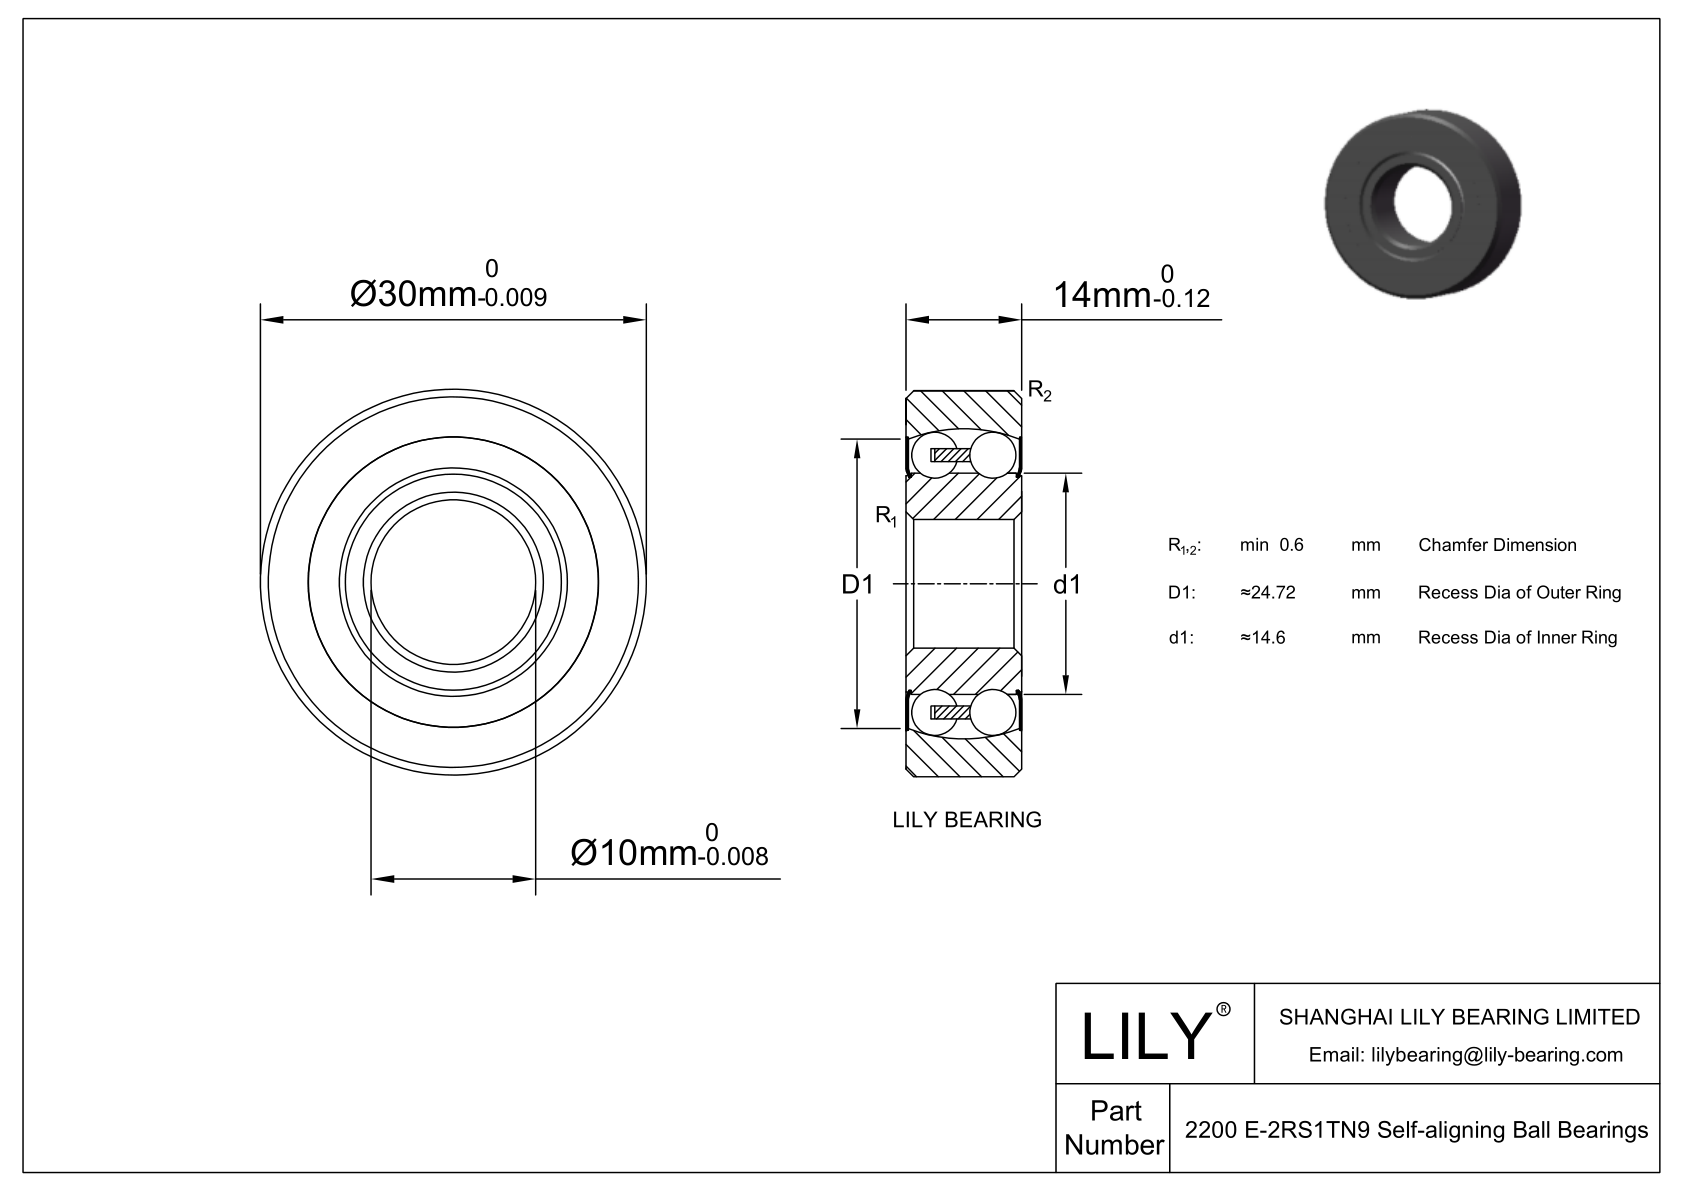 CE2200 E-SIPP Silicon Nitride Self Aligning Ball Bearings cad drawing